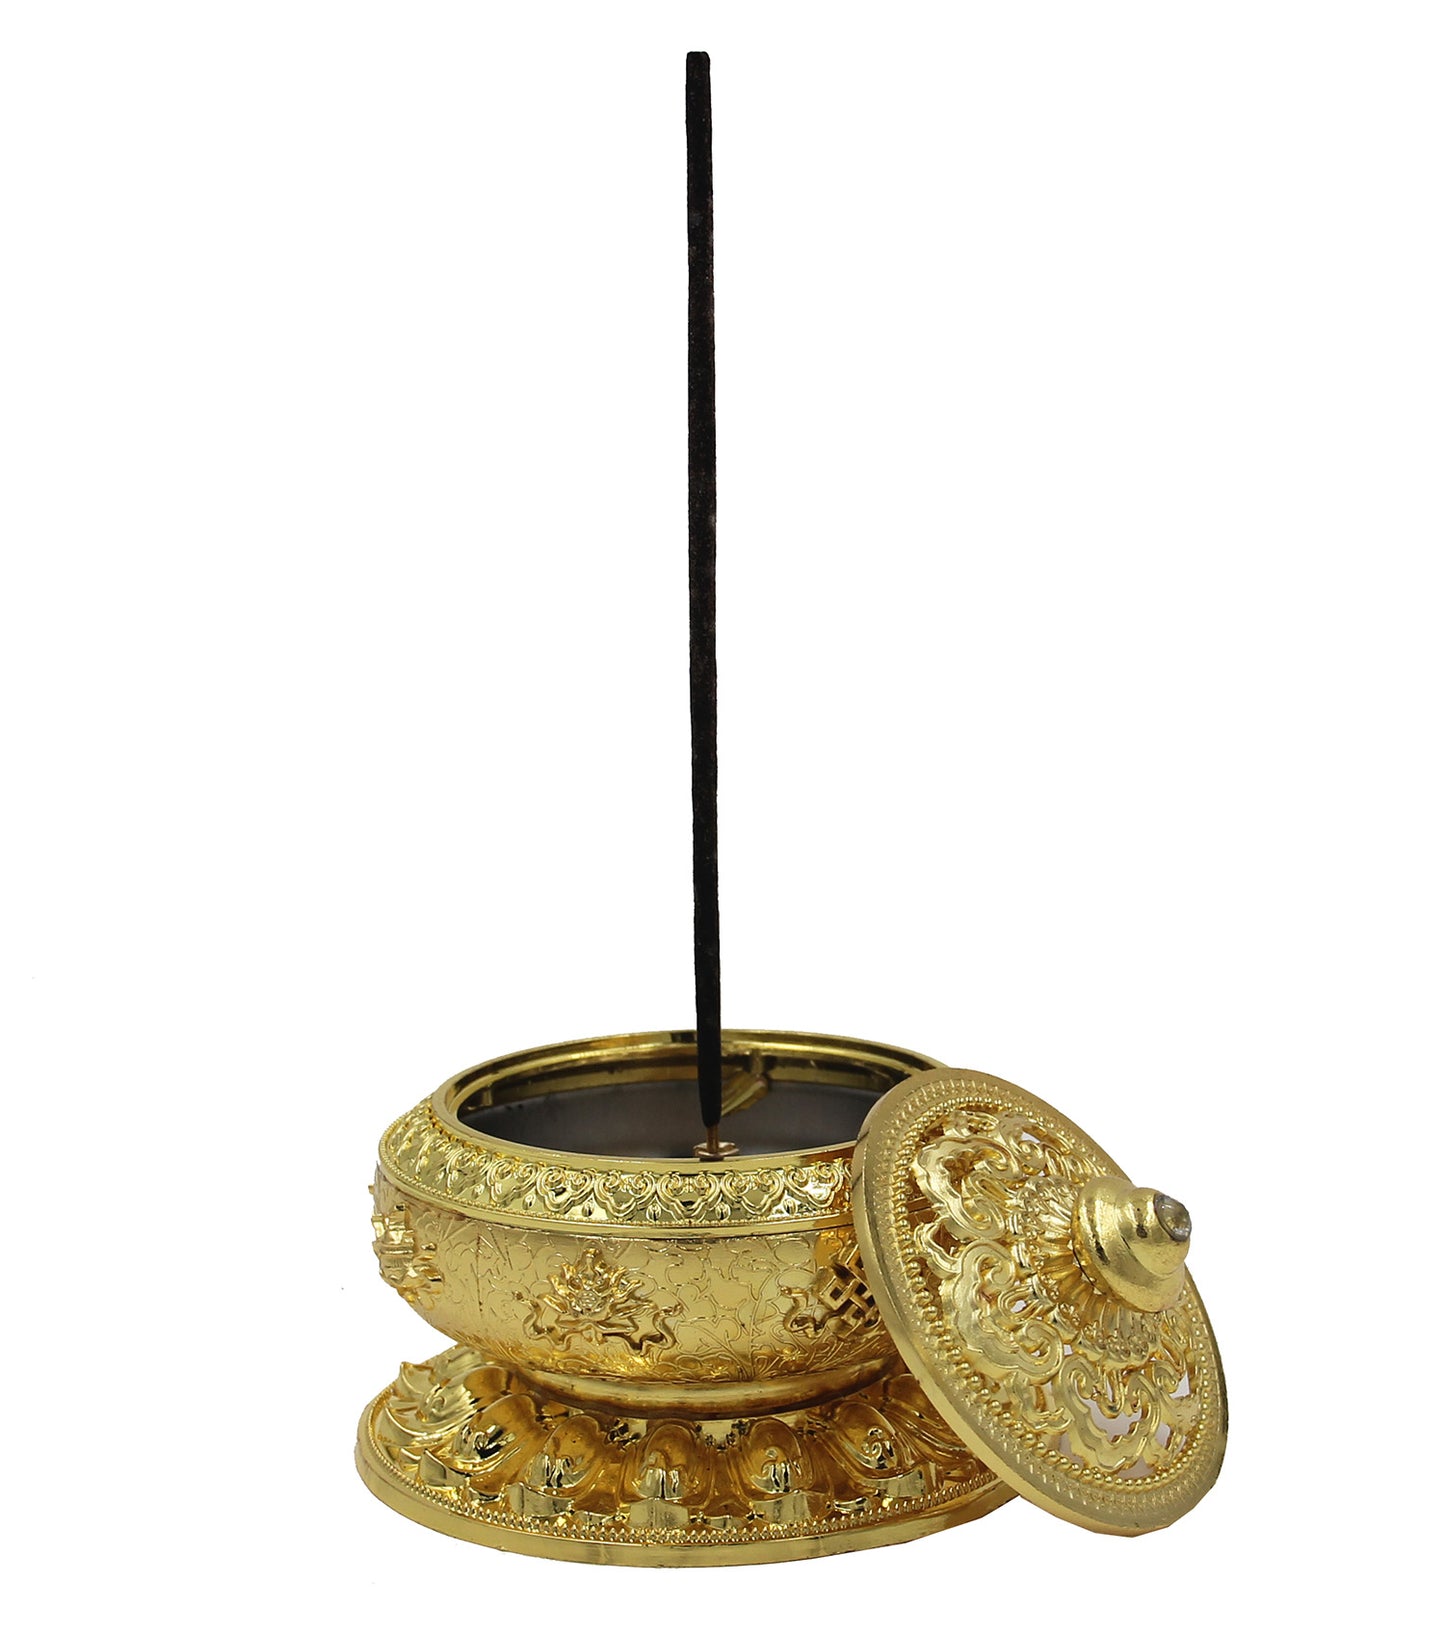 Charcoal Incense Burner 3 Inches Tall